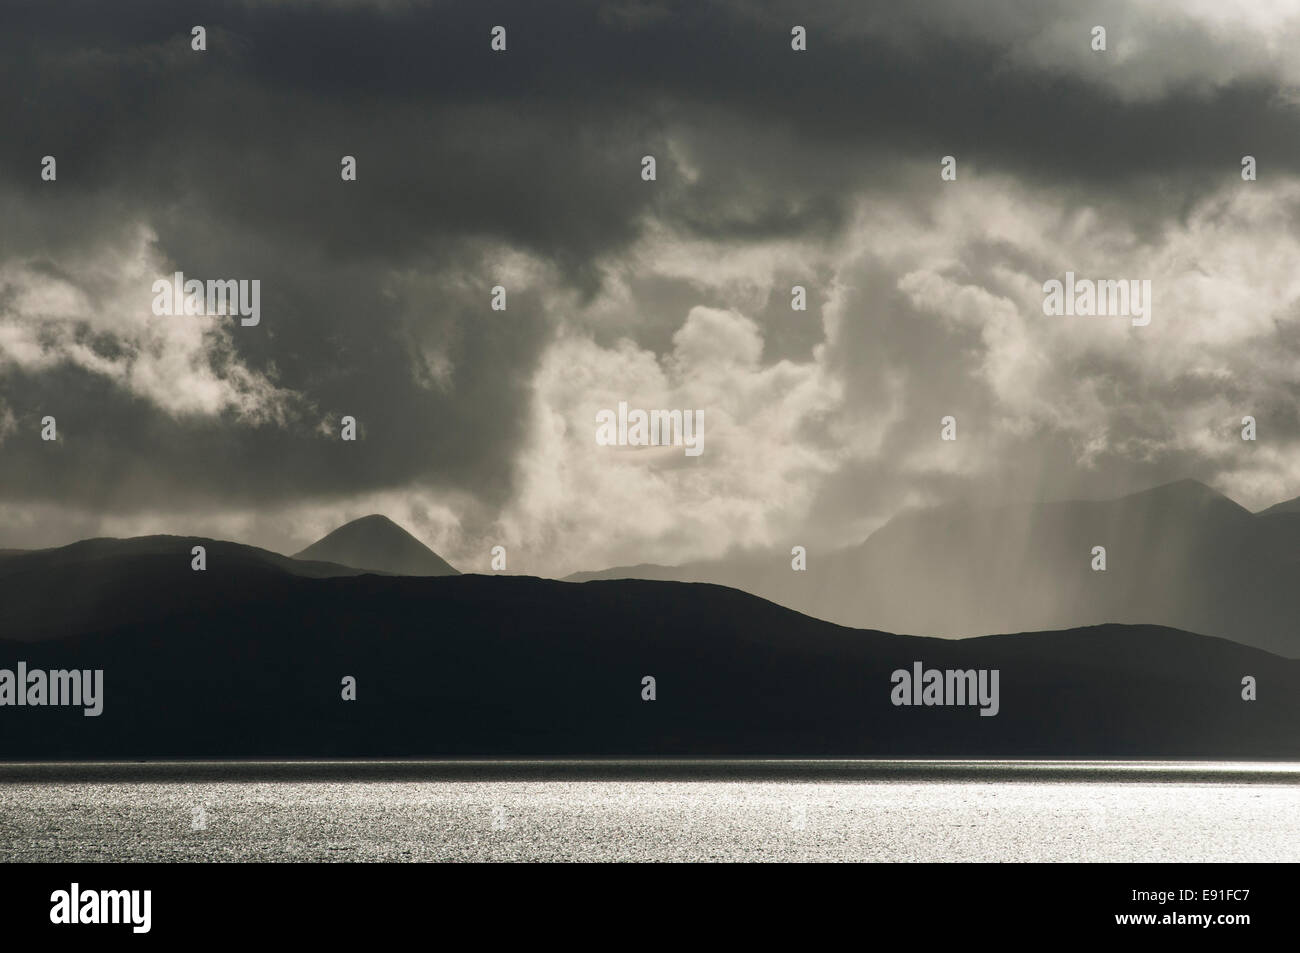 Stormy skies across the sea, among the western Isles of Scotland. Stock Photo